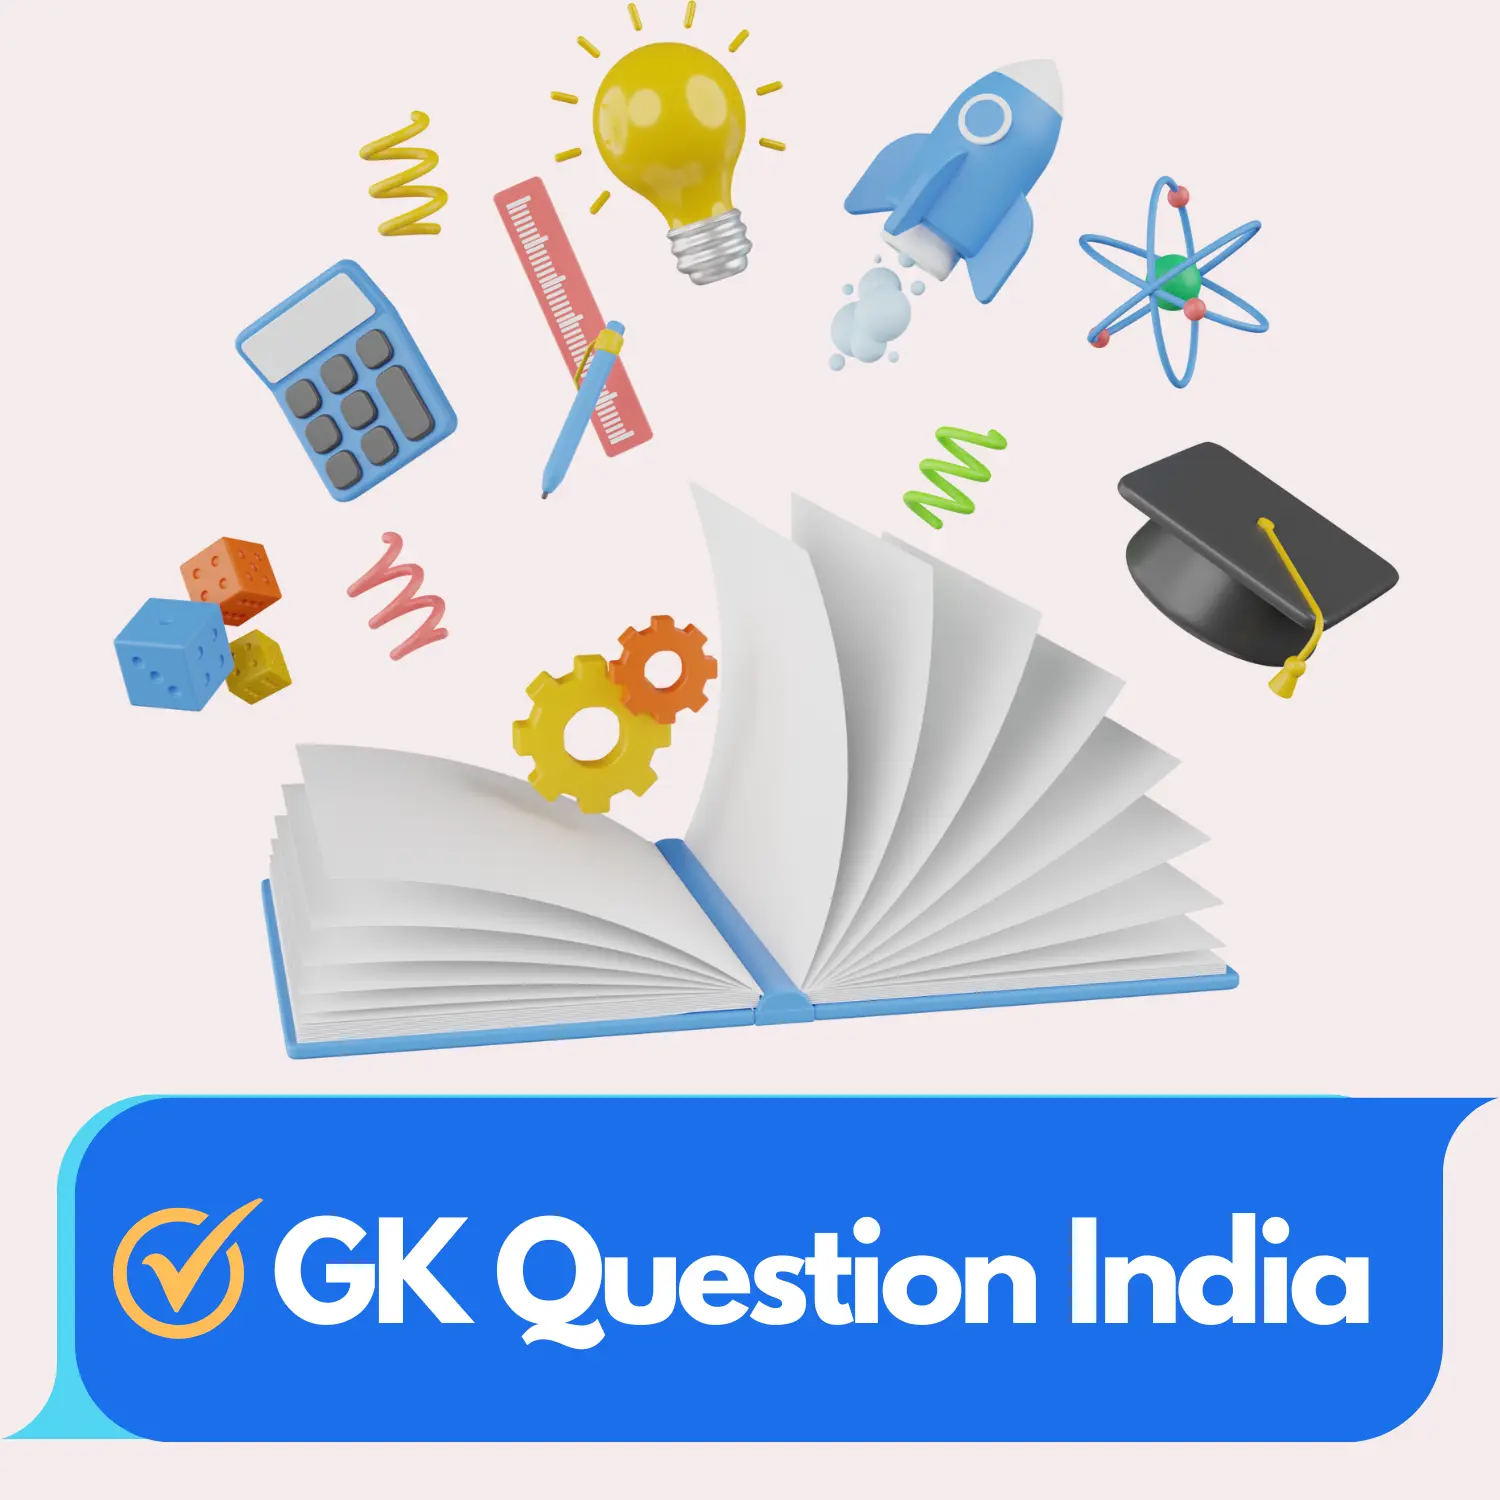 GK-Question-India